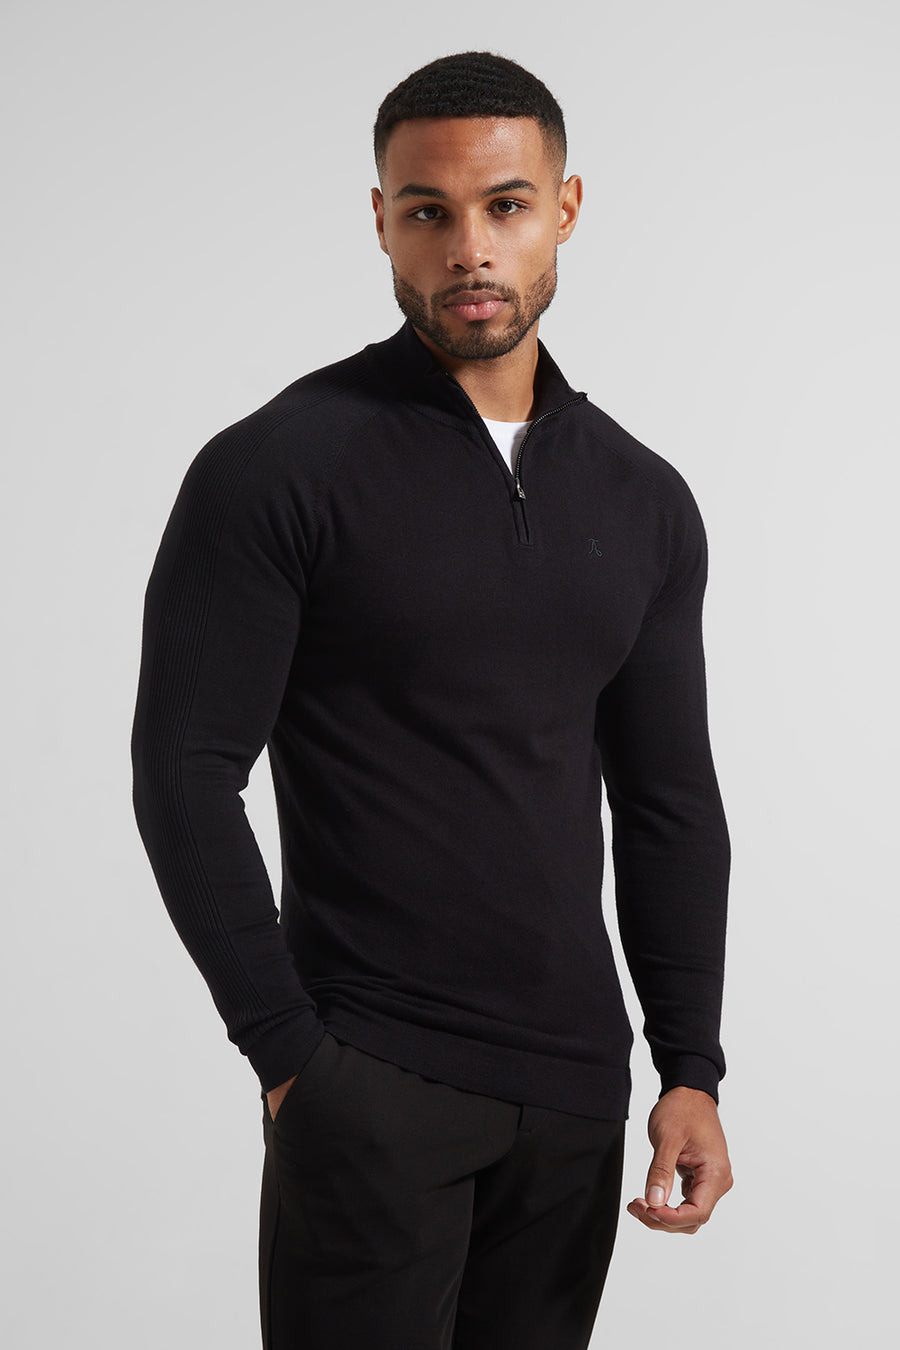 Placement Rib Half Zip Neck Long Sleeve in Black - TAILORED ATHLETE - USA